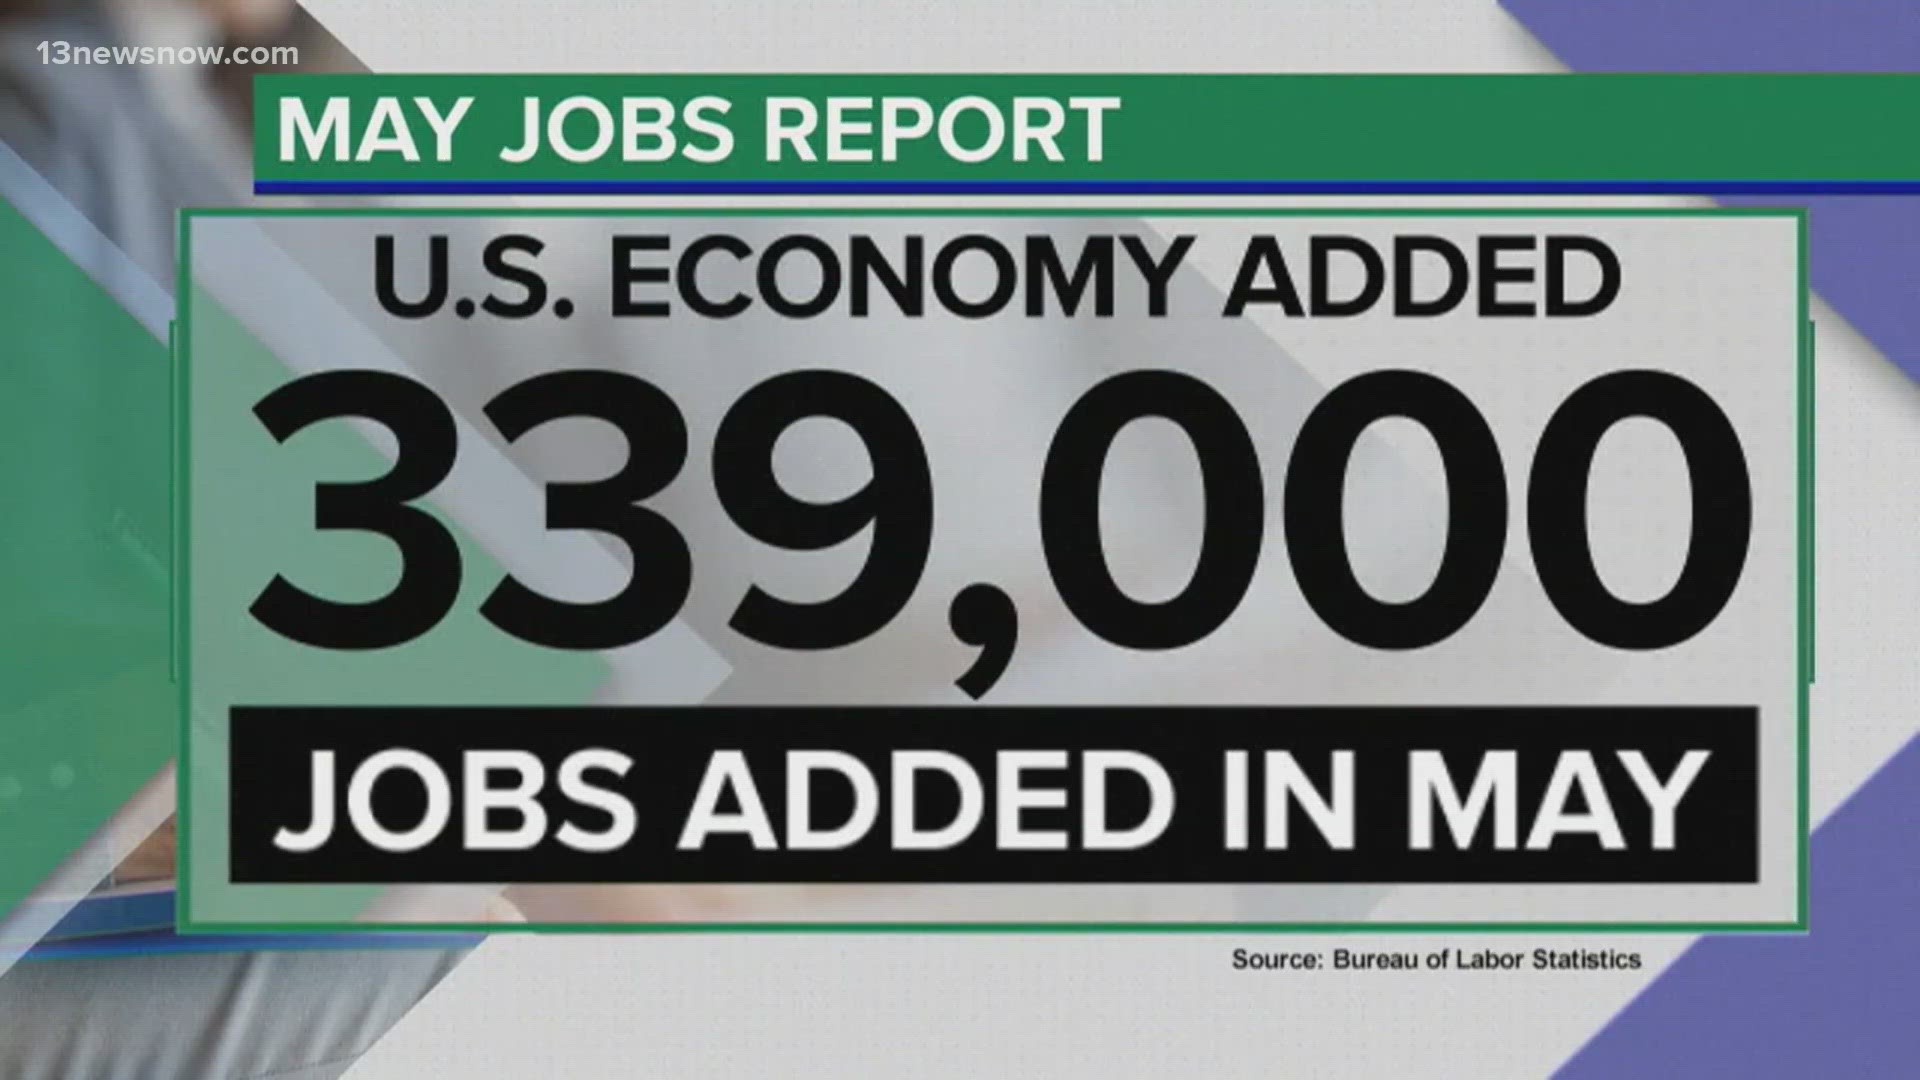 Now to the new jobs report released this morning: the job market was even stronger in May than analysts expected.